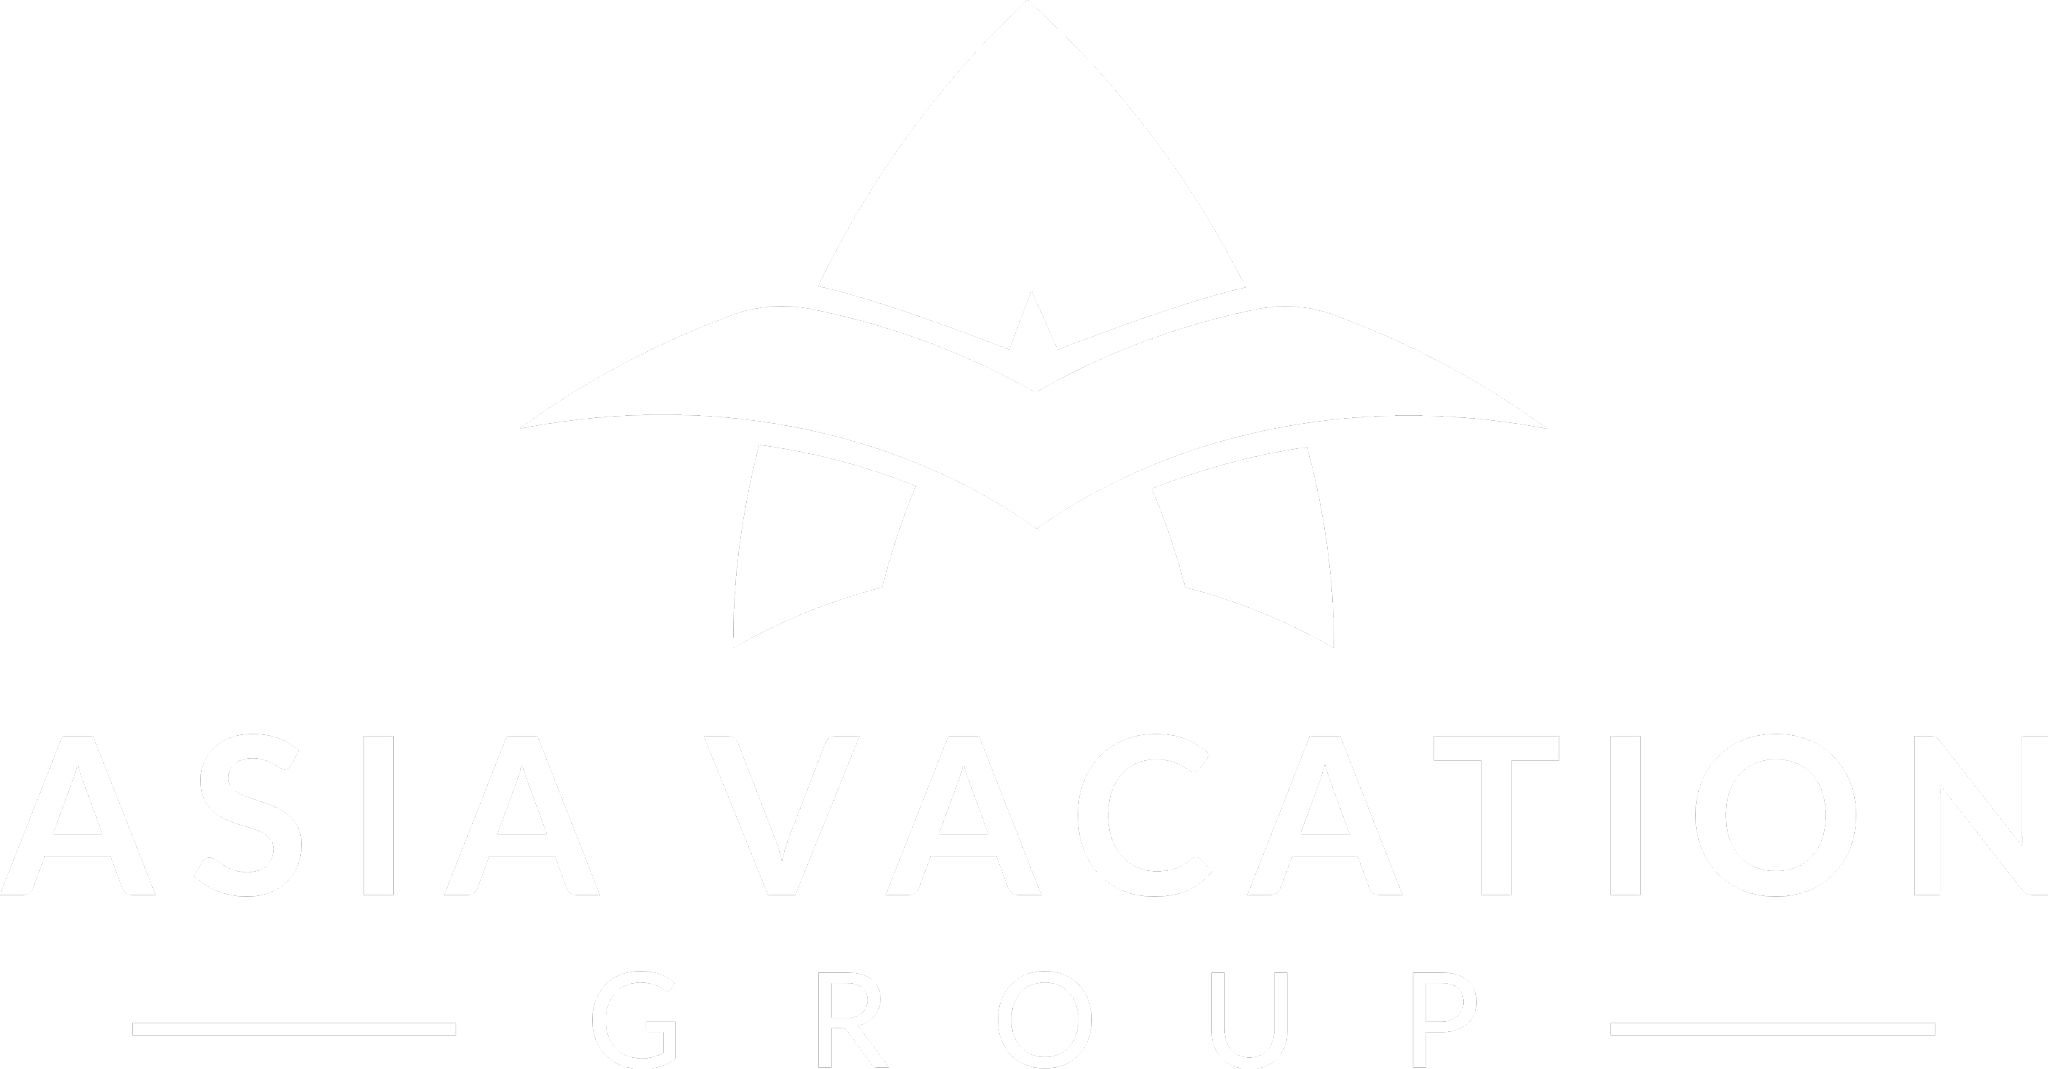 Asia Vacation Group logo